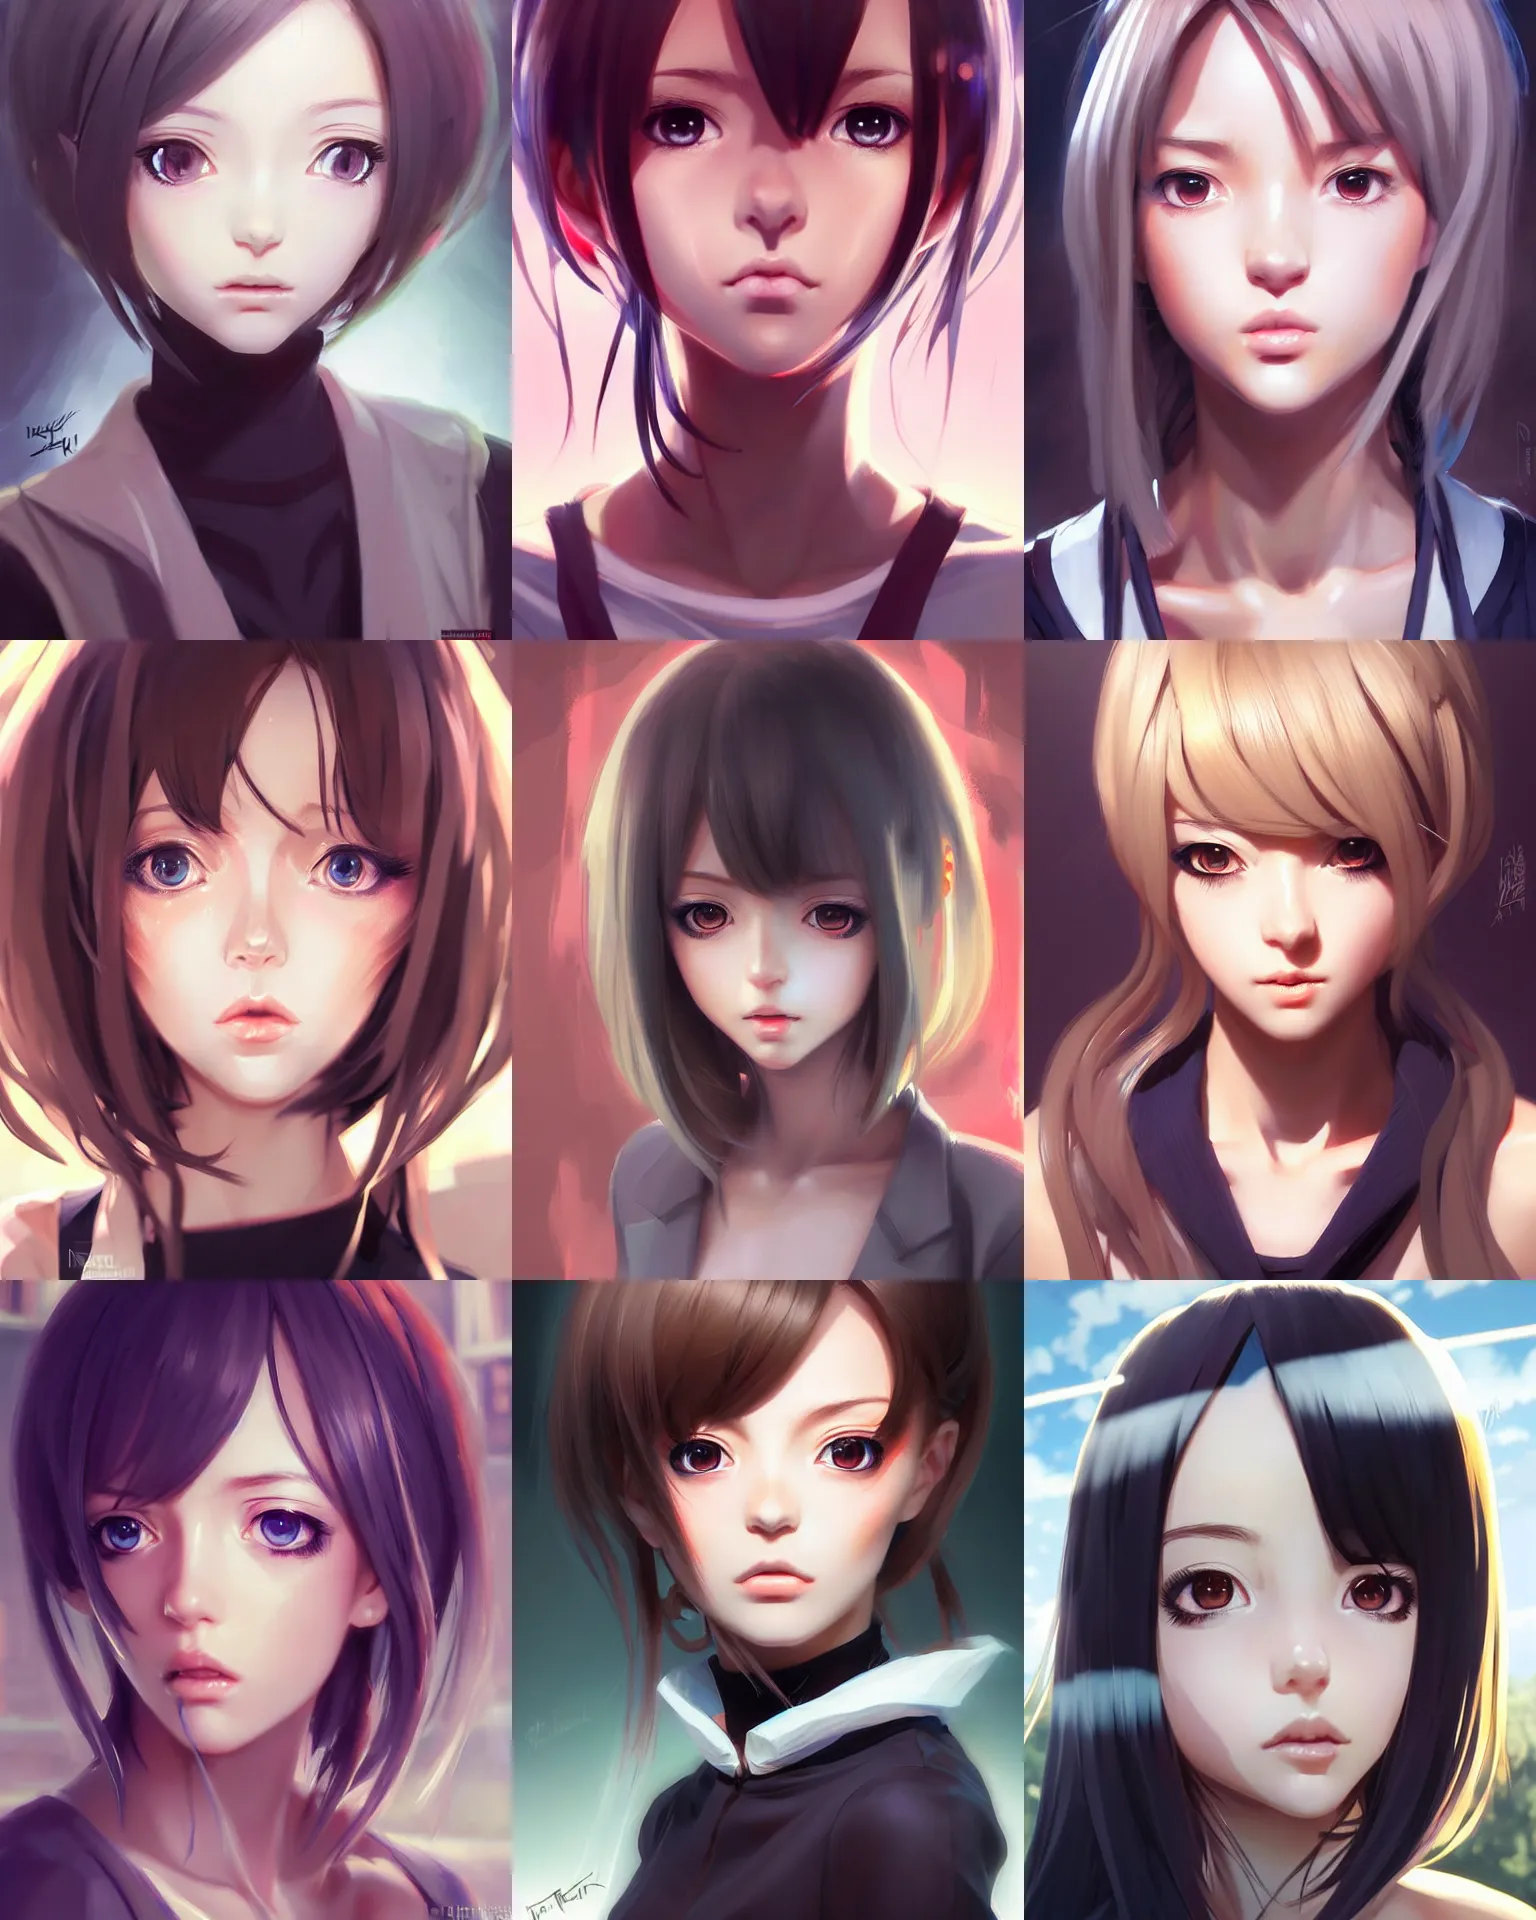 Prompt: portrait anime interdimensional mechanic girl, cute - fine - face, pretty face, realistic shaded perfect face, fine details. anime. realistic shaded lighting by ilya kuvshinov giuseppe dangelico pino and michael garmash and rob rey, iamag premiere, aaaa achievement collection, elegant, fabulous, eyes open in wonder